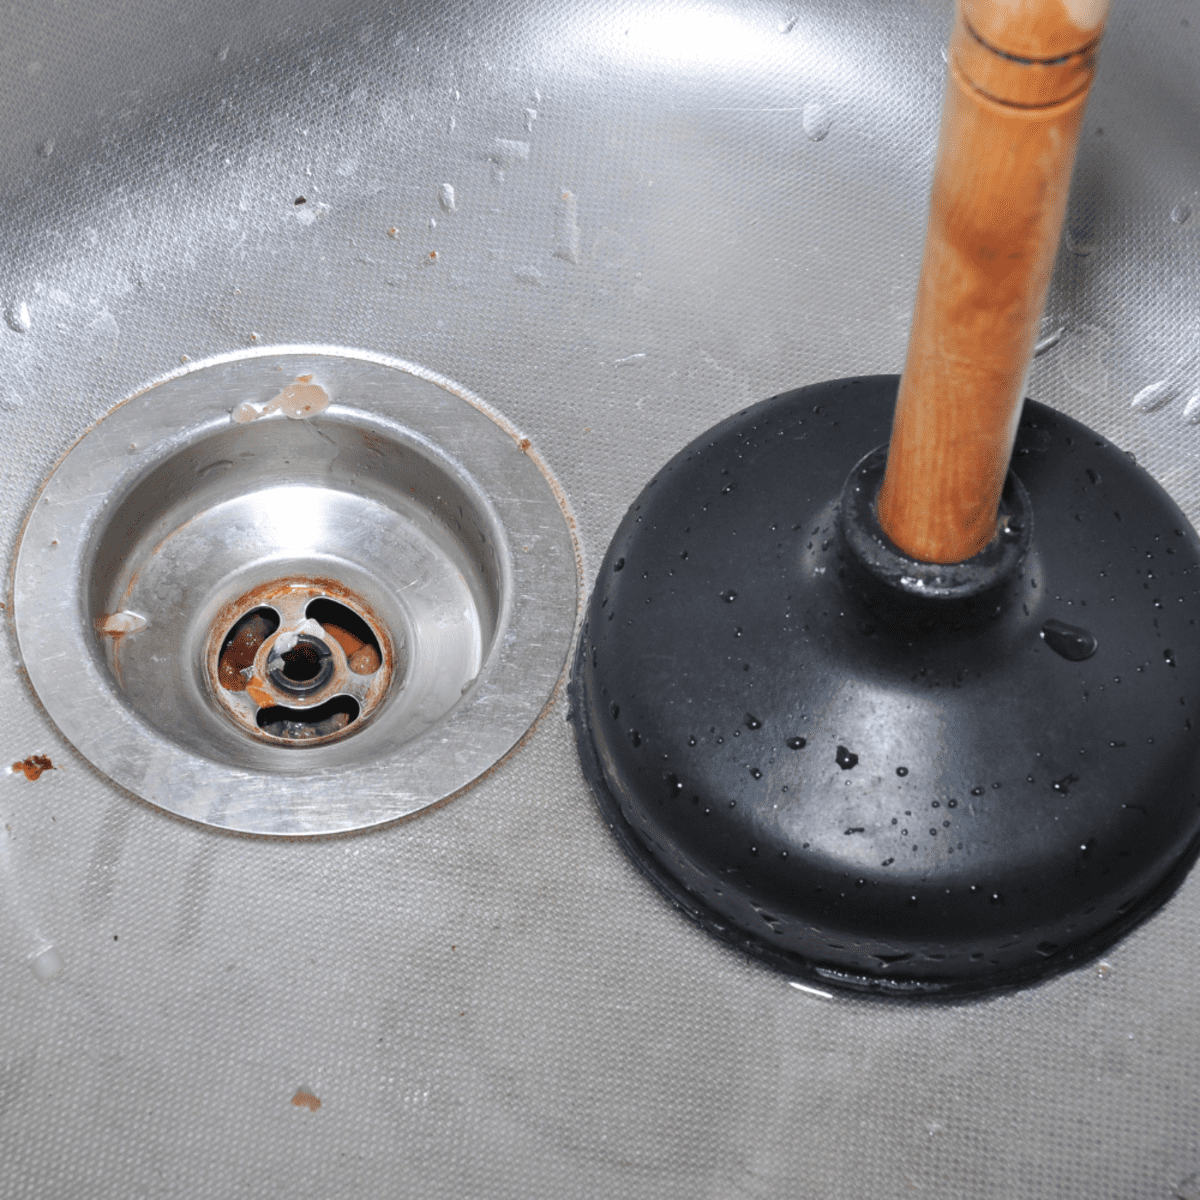 How to Drain a Water Heater Fast! - Dengarden